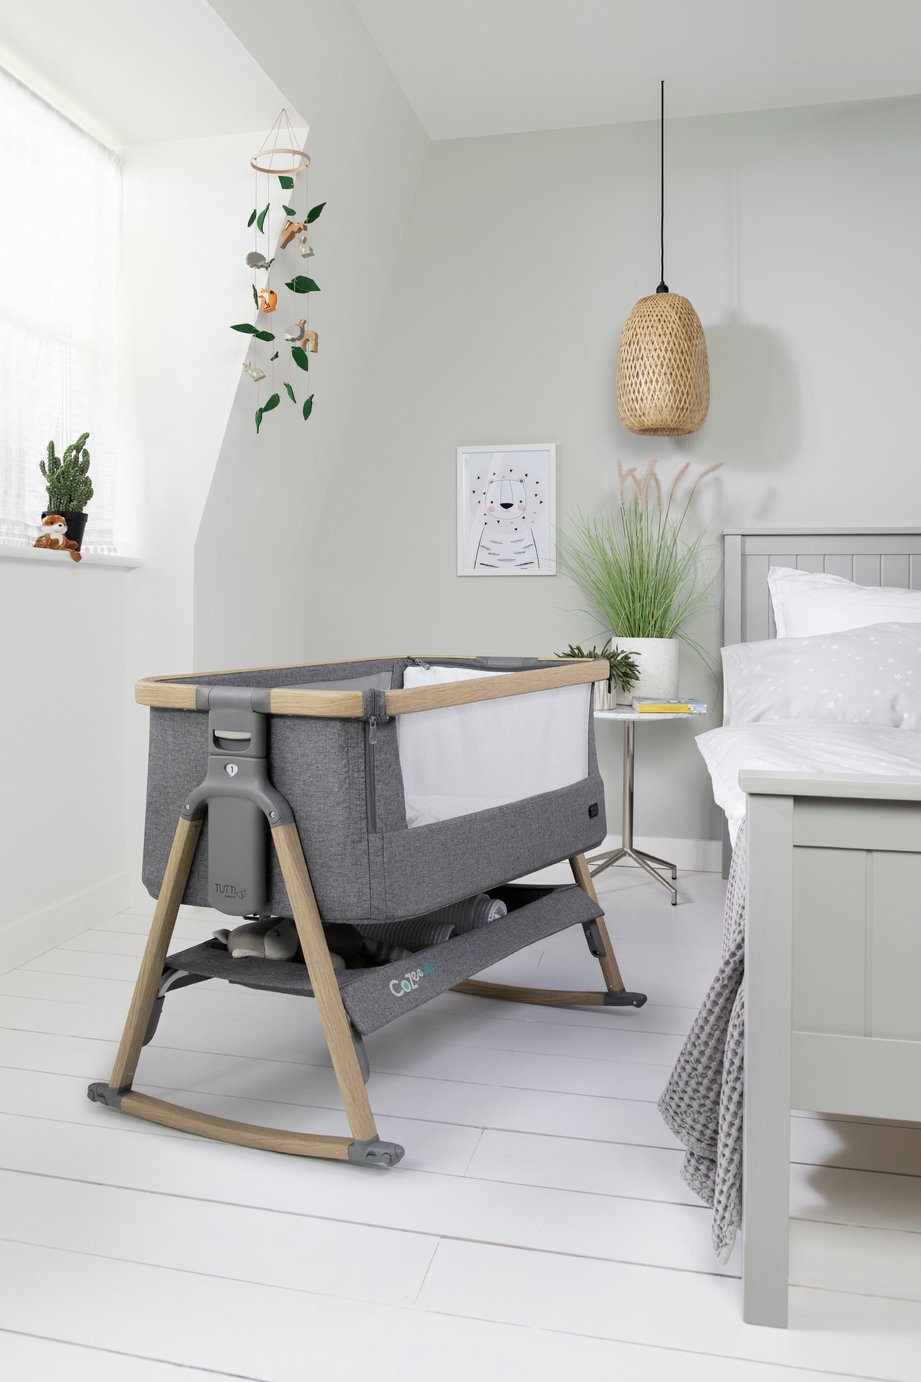 CoZee Air Bedside Crib Review